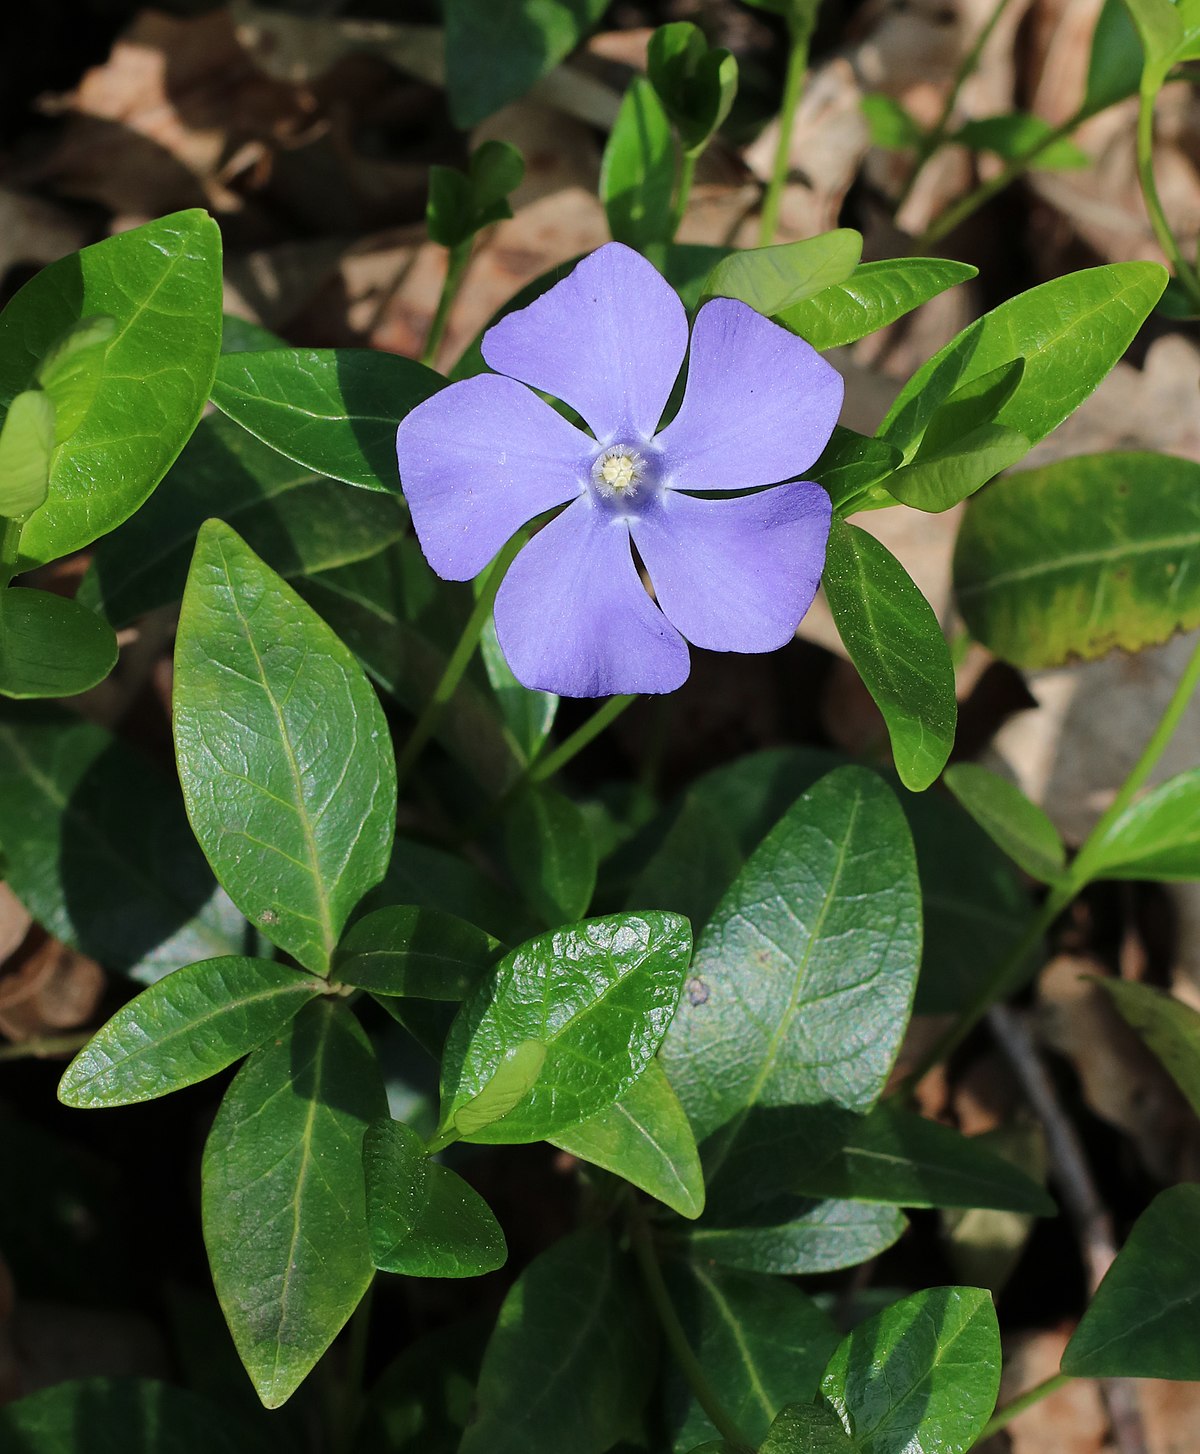 Periwinkle color